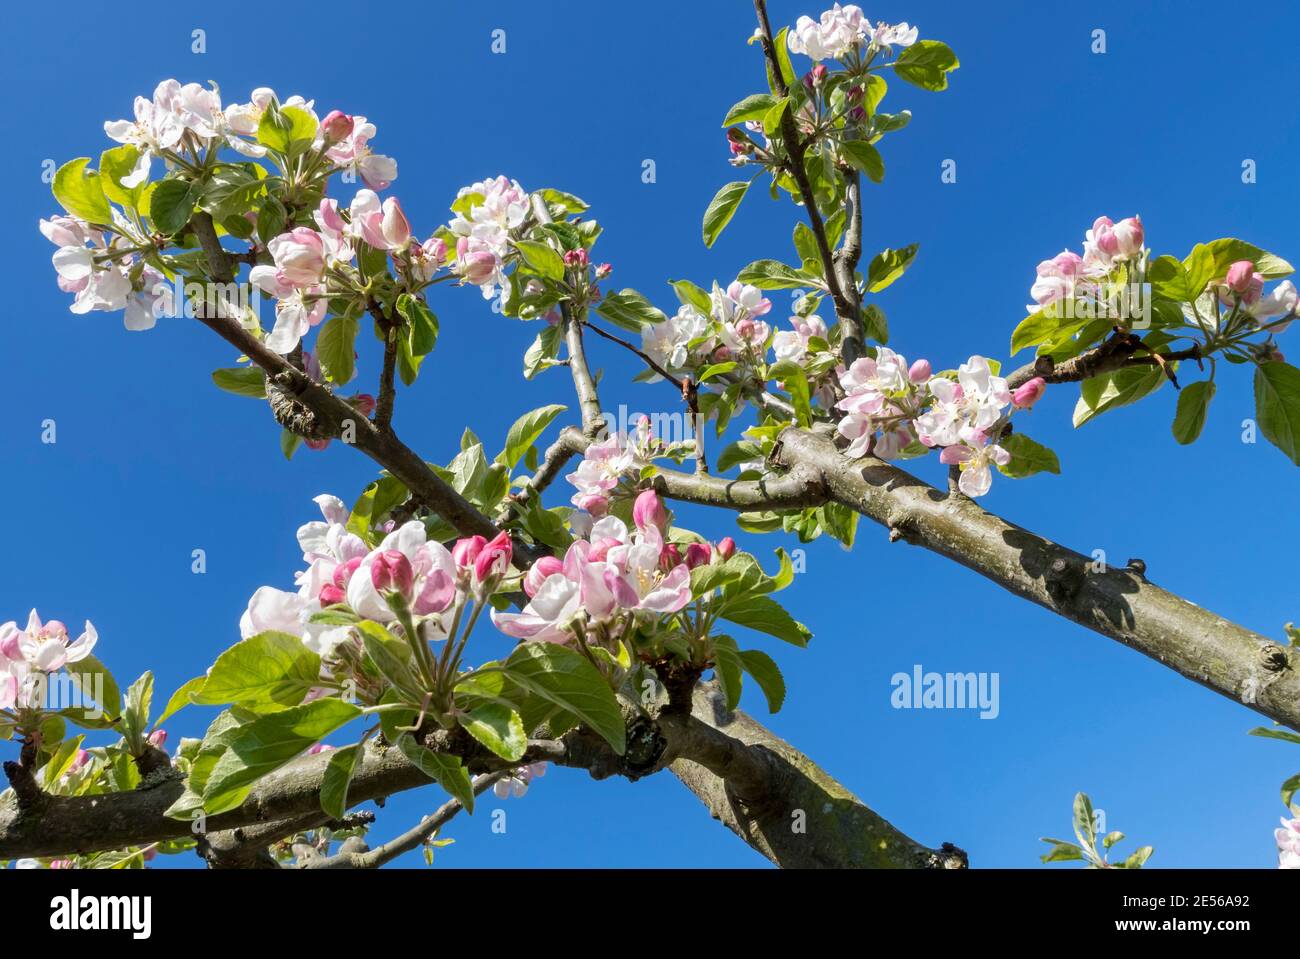 Close up of pink blossom flowers on an apple tree in spring against a bright blue sky. Stock Photo